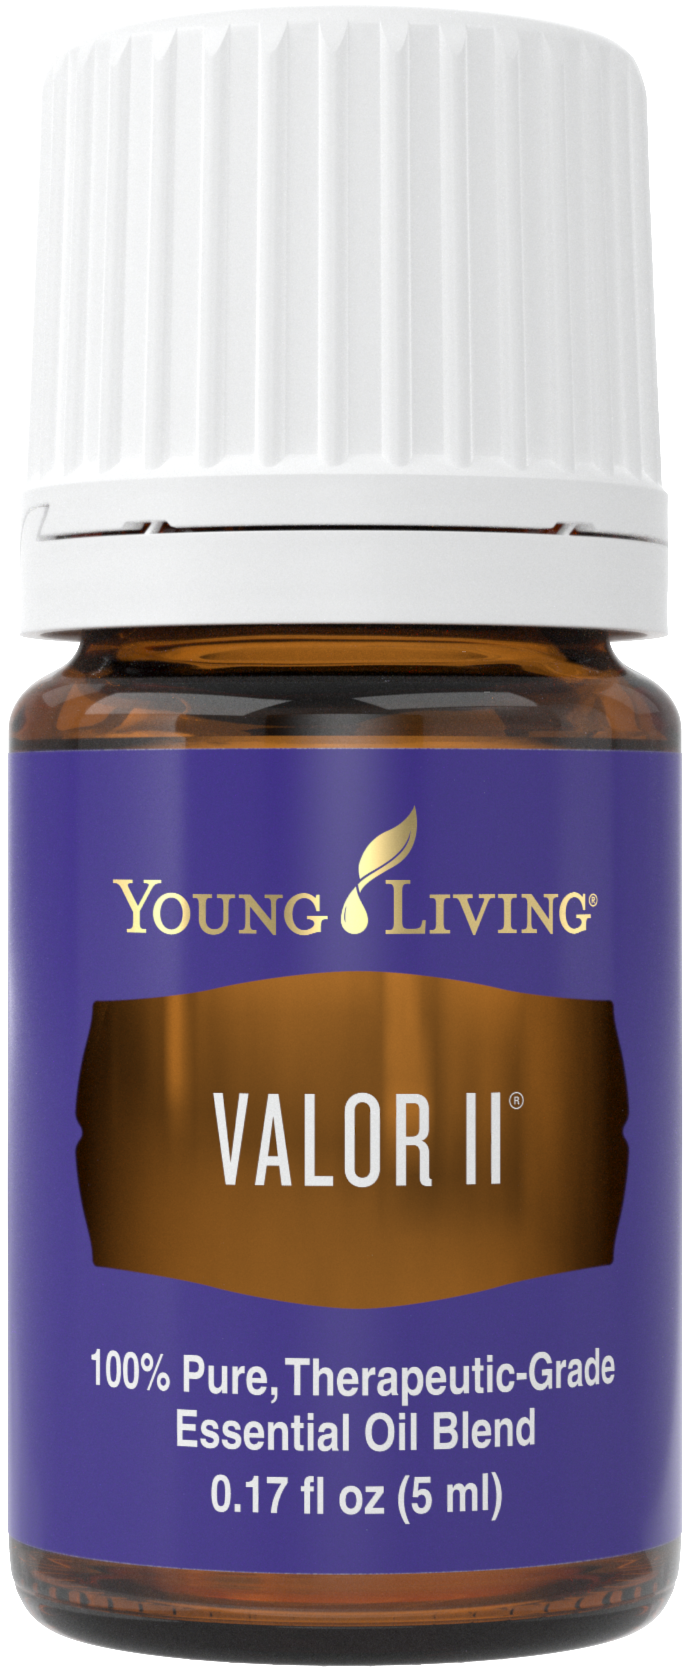 Valor II 5ml Silo.png